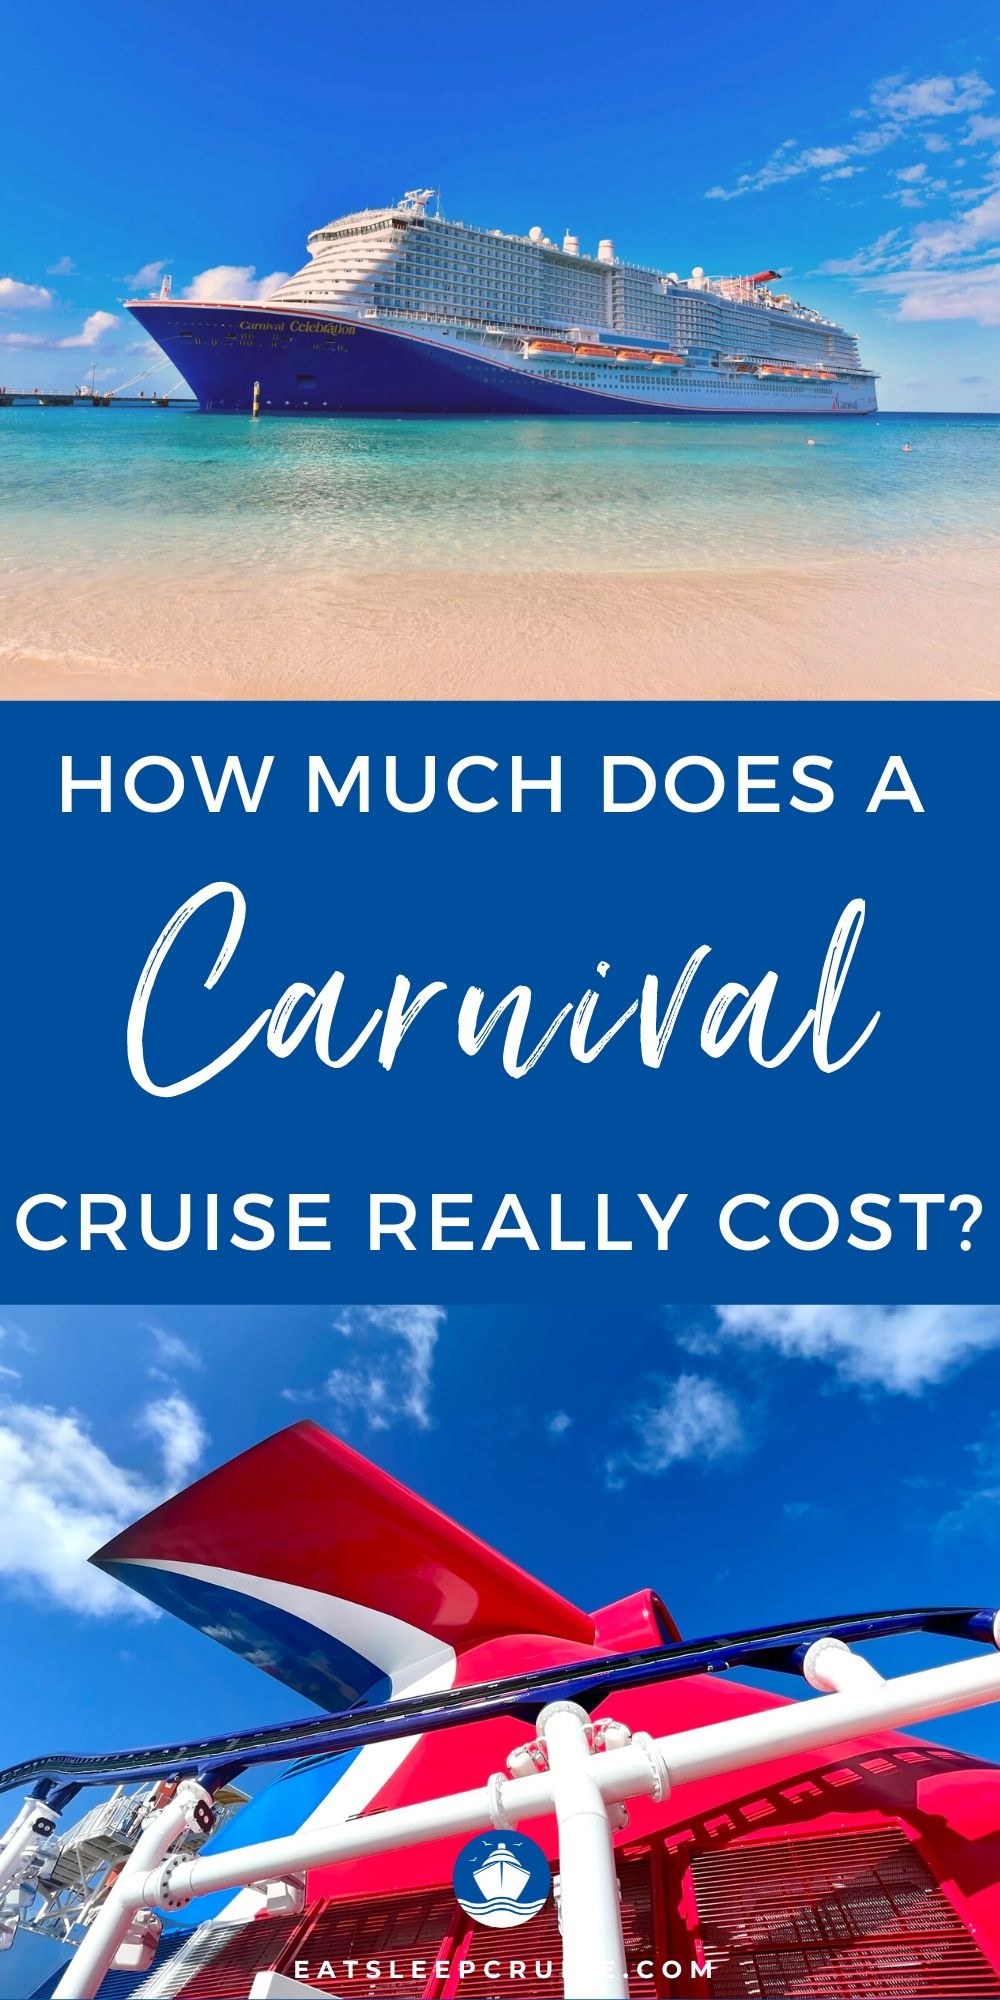 how-much-does-a-carnival-cruise-cost-2-eatsleepcruise